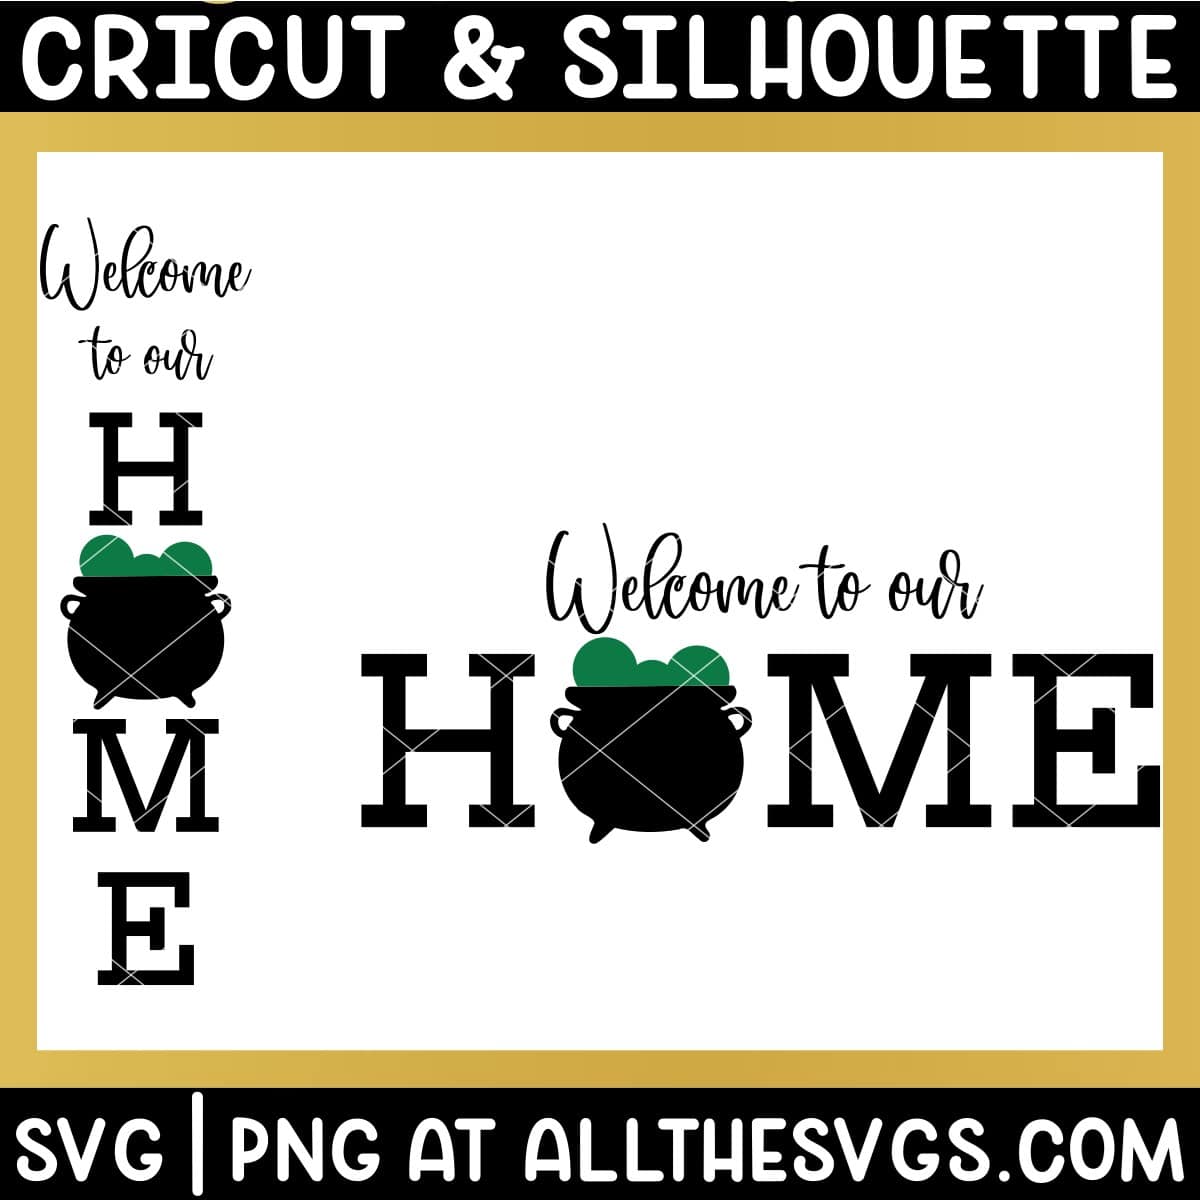 welcome to our home sign svg file with witch cauldron.